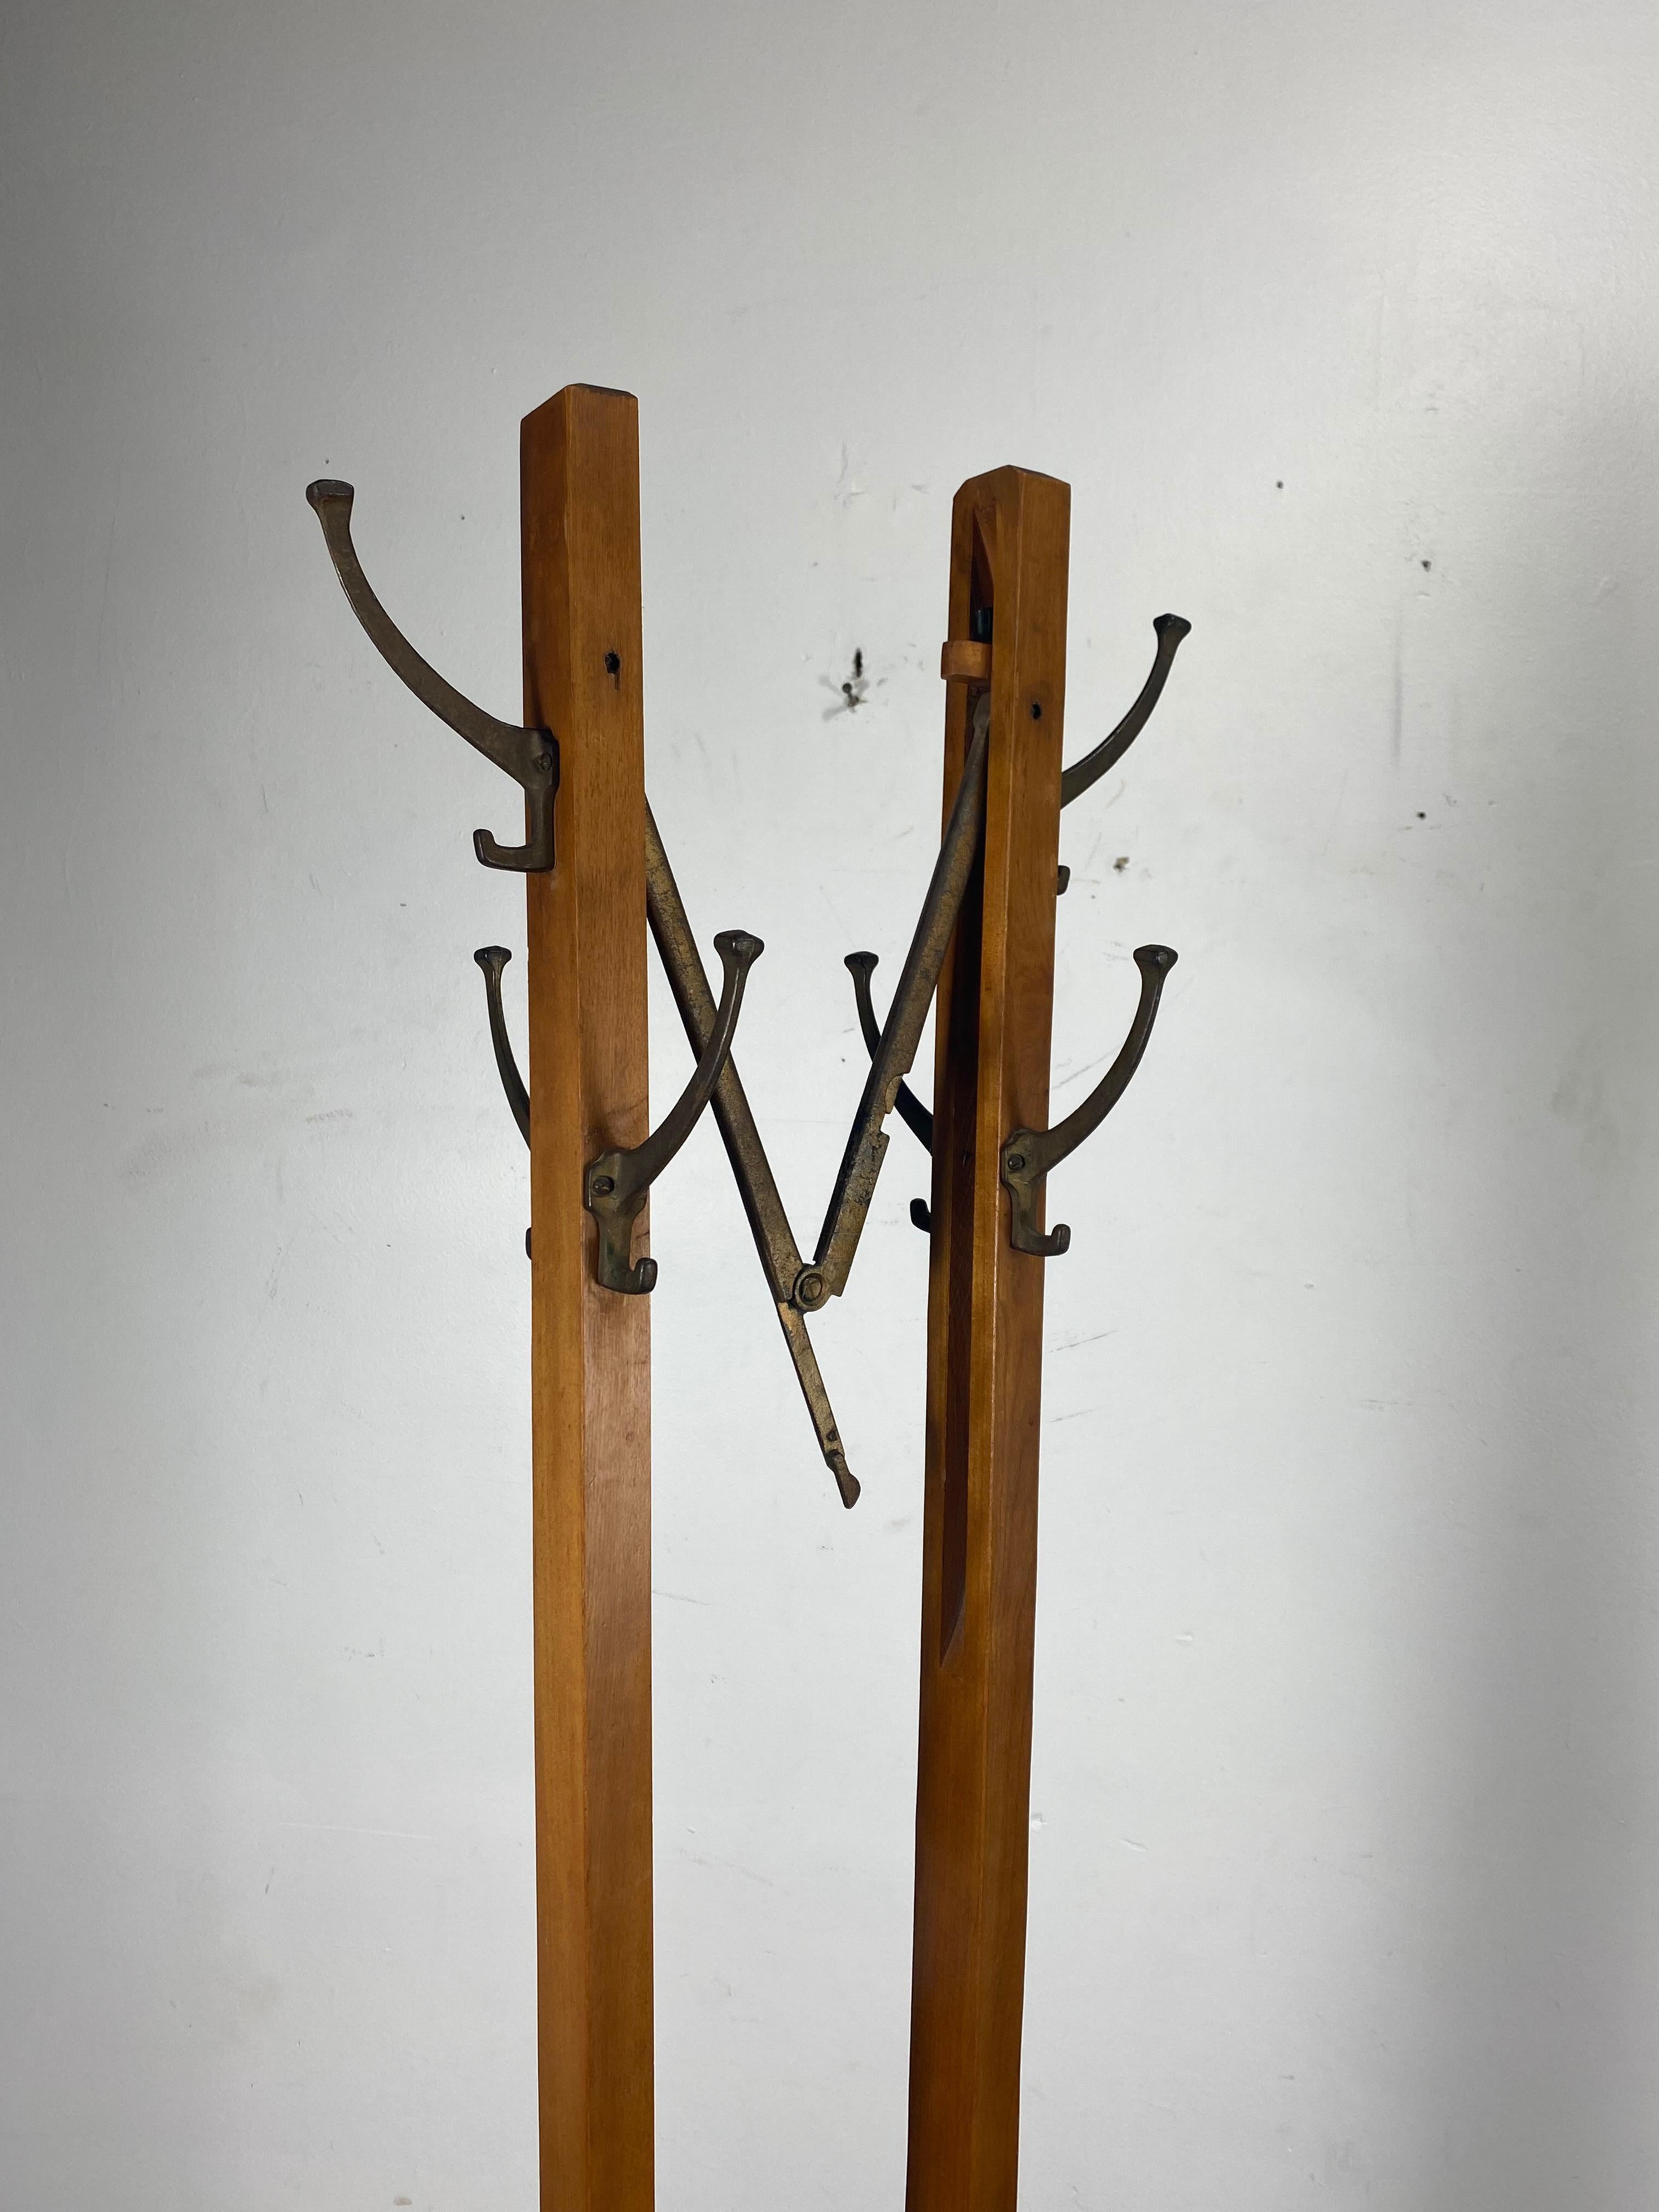 Rare and unusual expanding Arts & Crafts free standing coat tree or stand, ingenious design, traditional coat tree that expands to create coat rack, retains original finish, patina as well as original brass hooks, measurements: closed 18